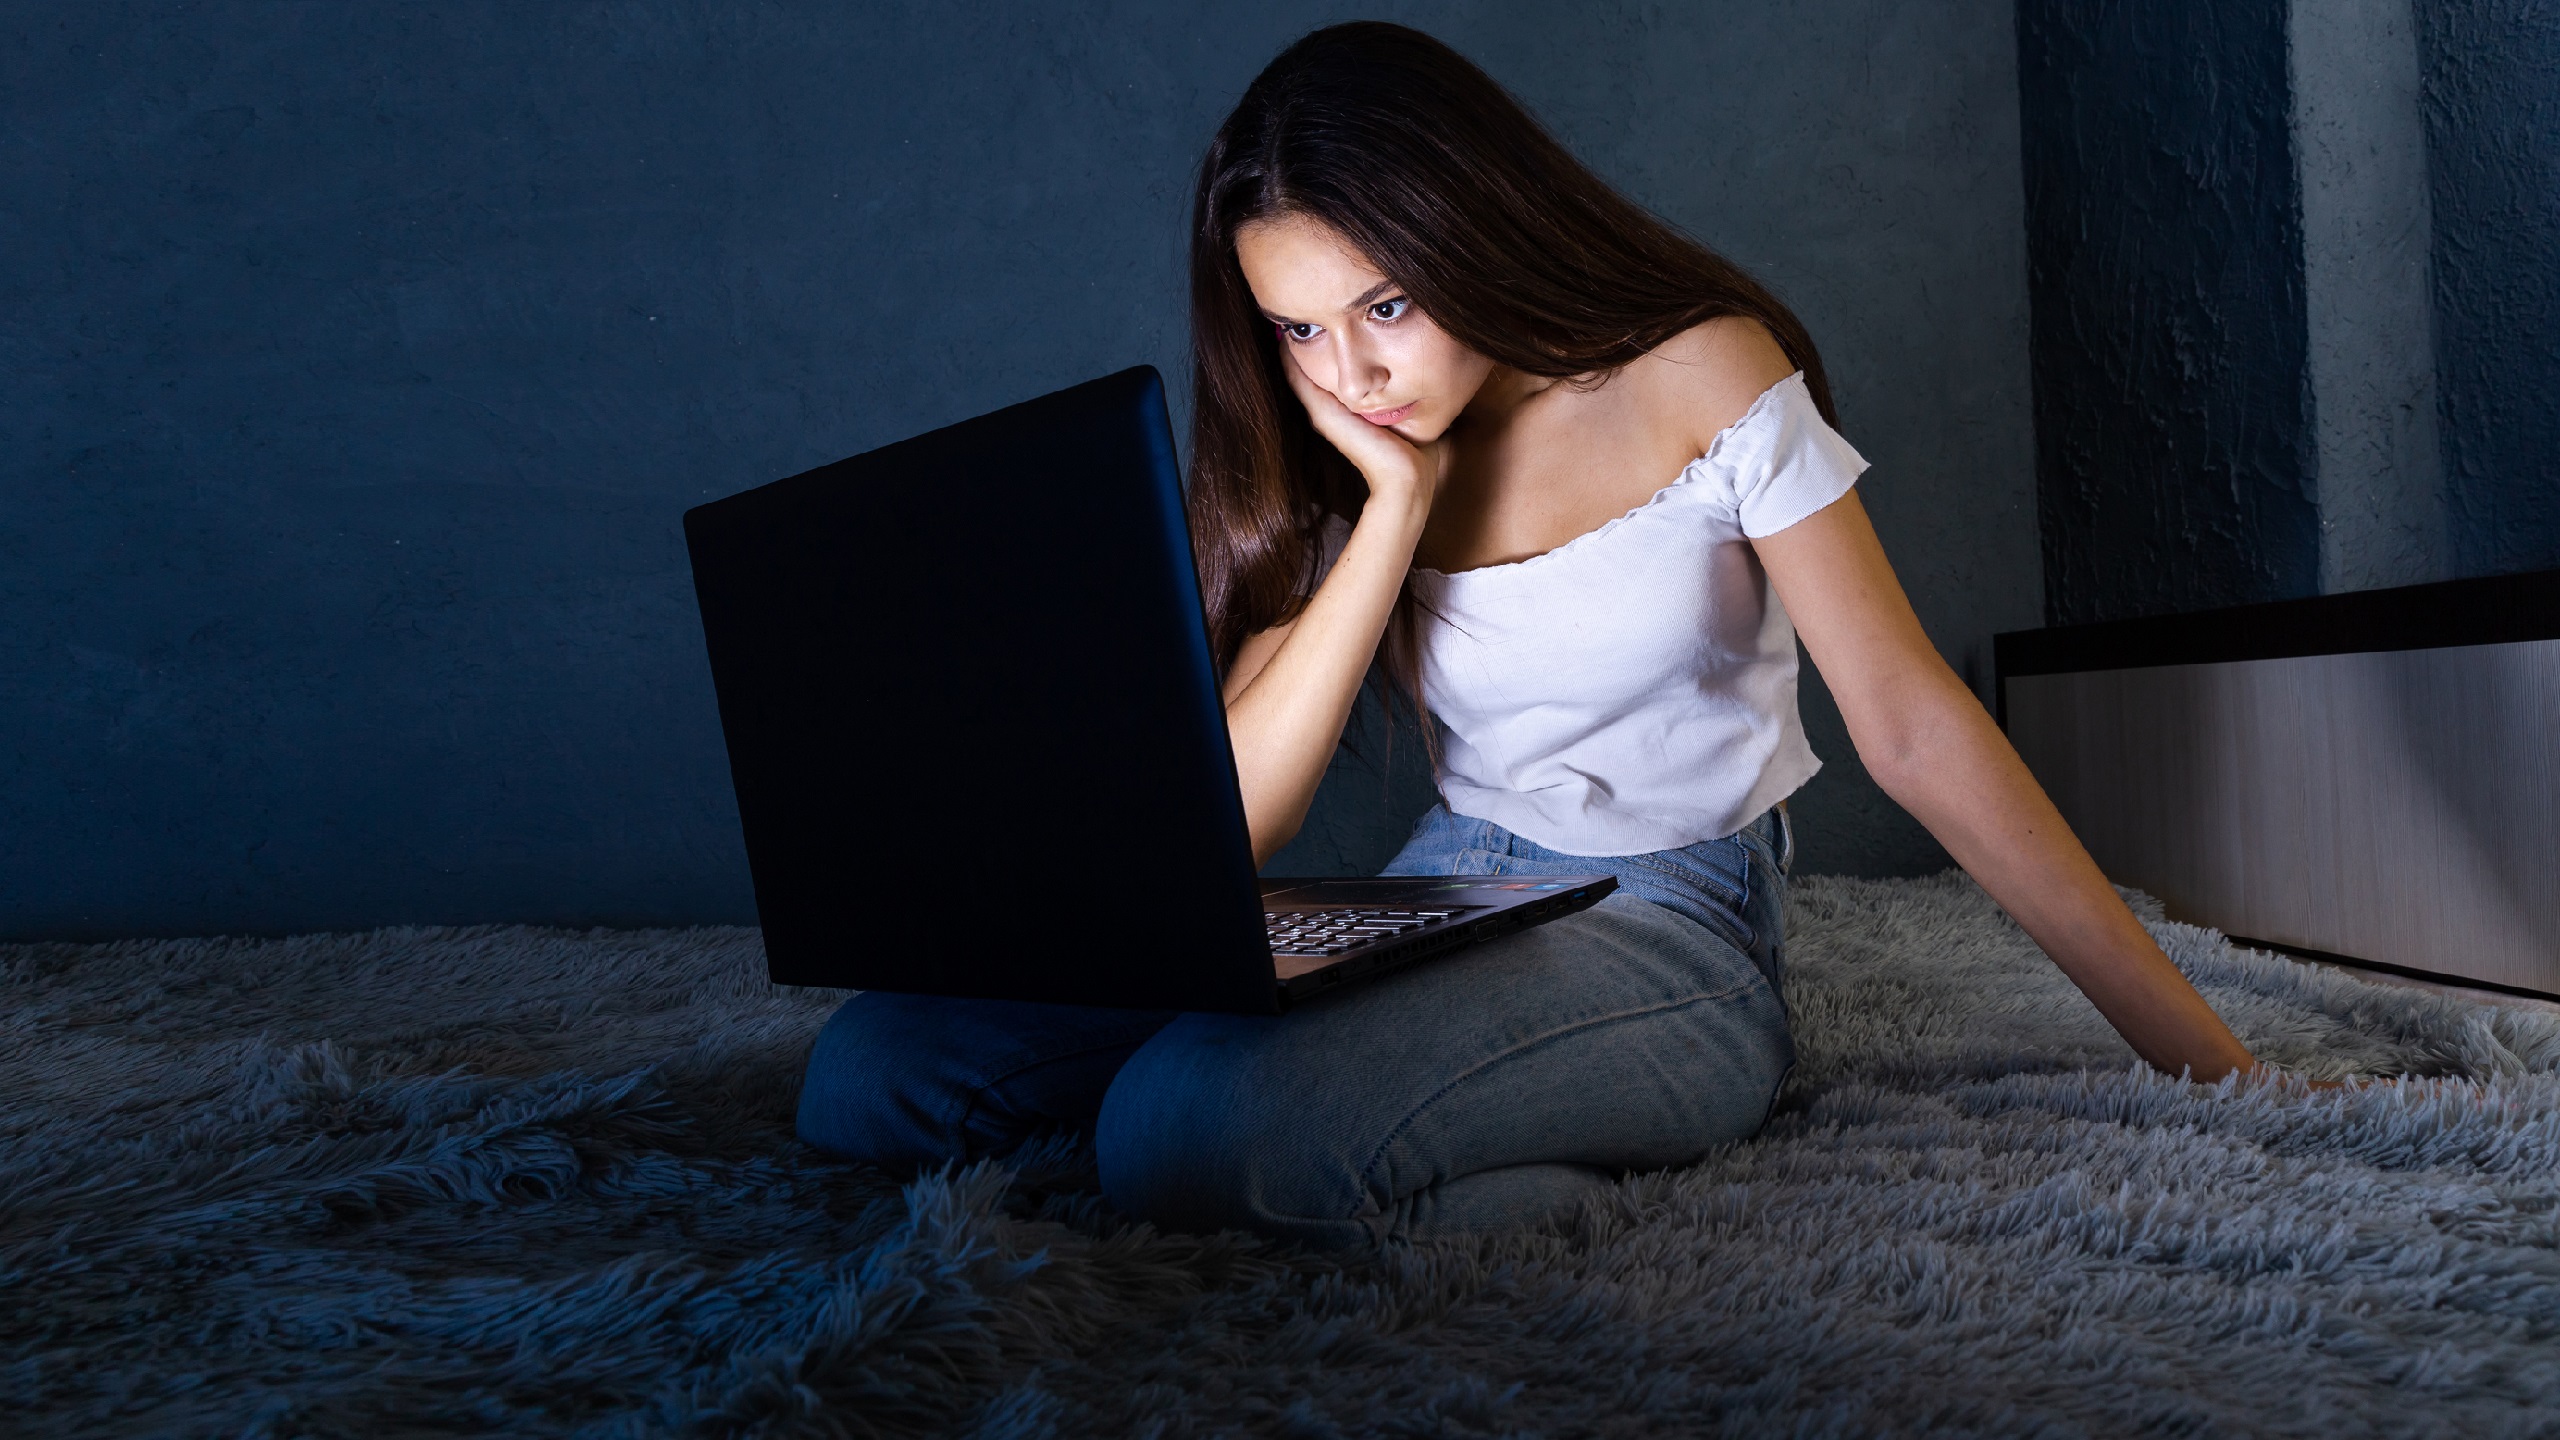 Putting an End to Cyberbullying and Cyber Extortion